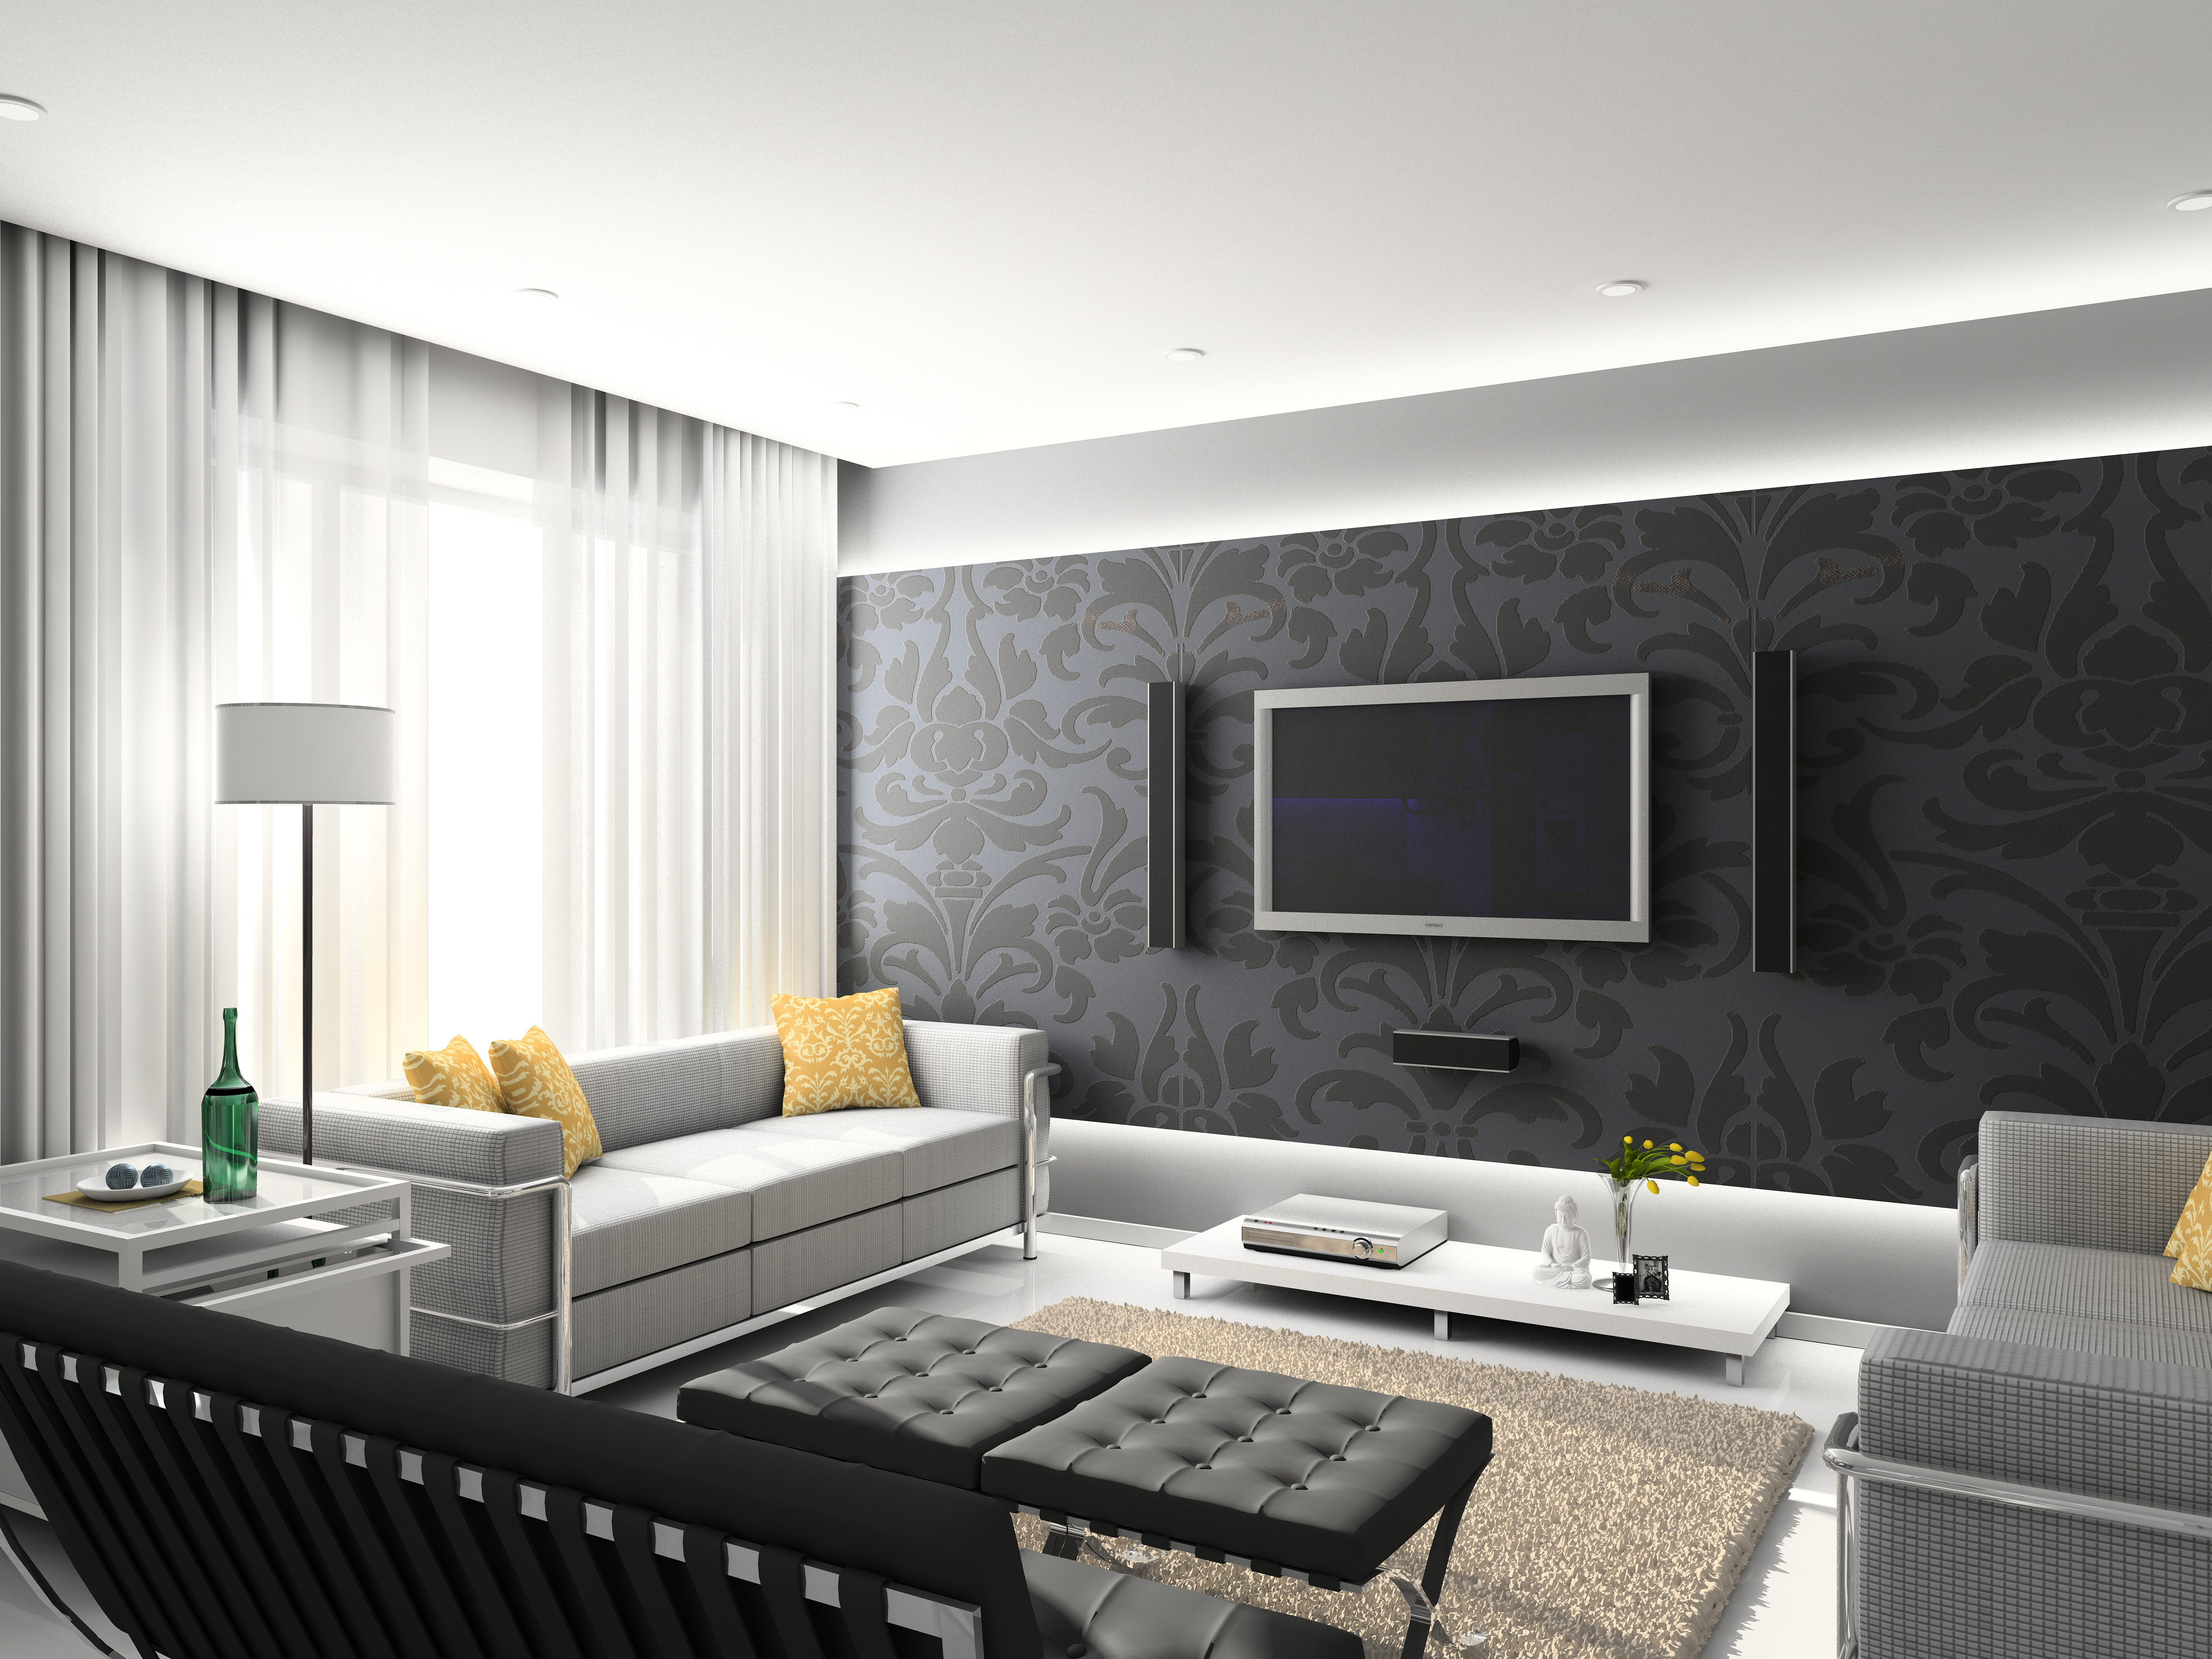 Wallpaper Design For Living Room that Can Liven Up The ...